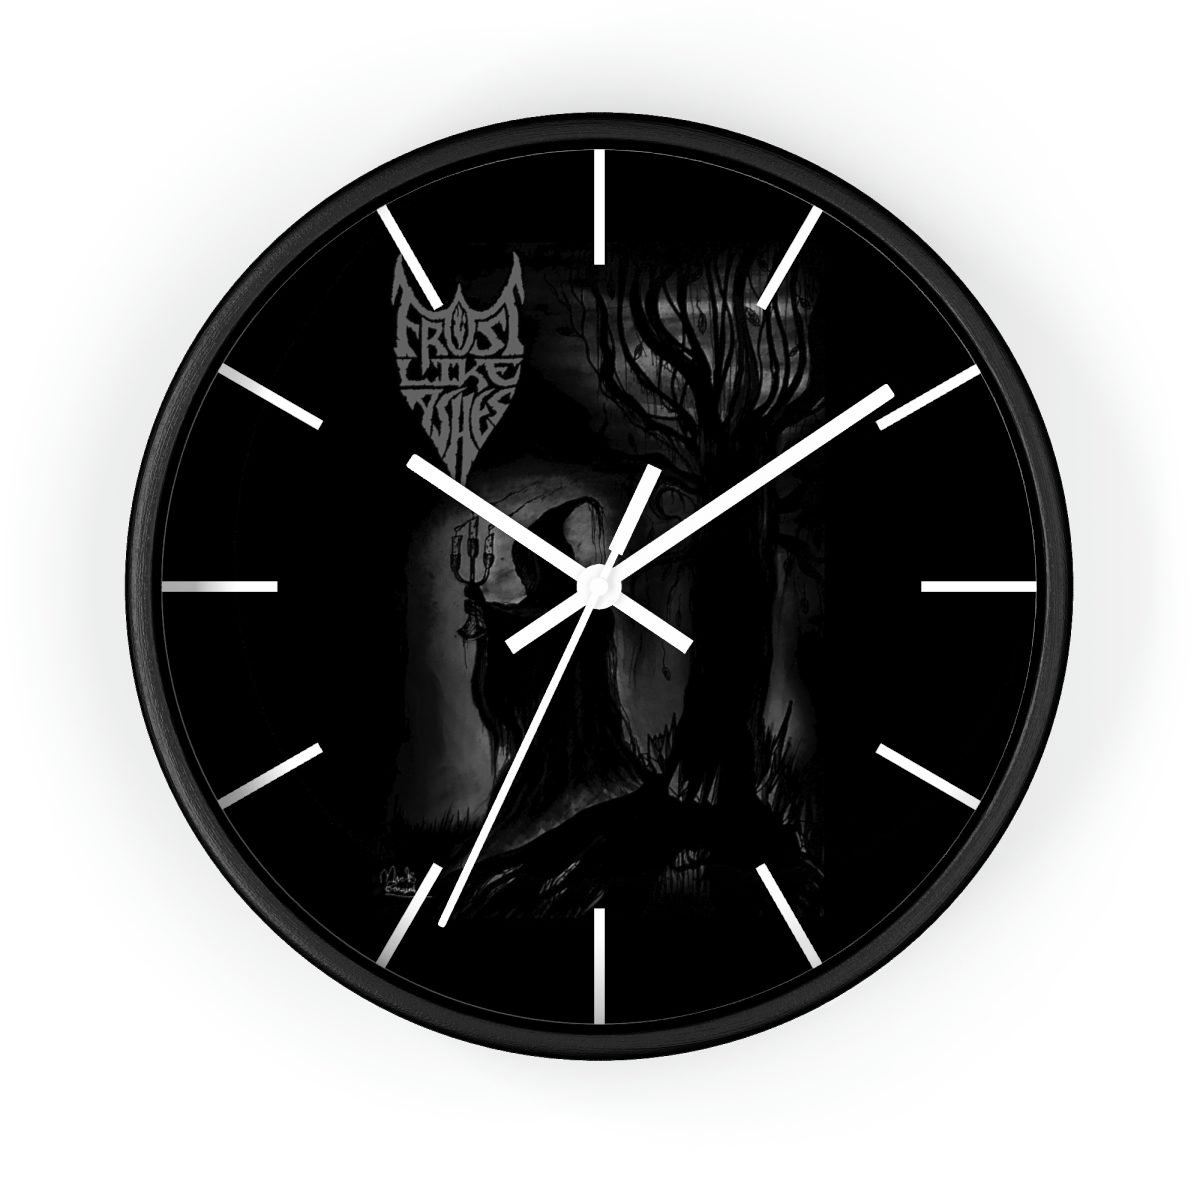 Frost Like Ashes Lord of Darkness Wall clock